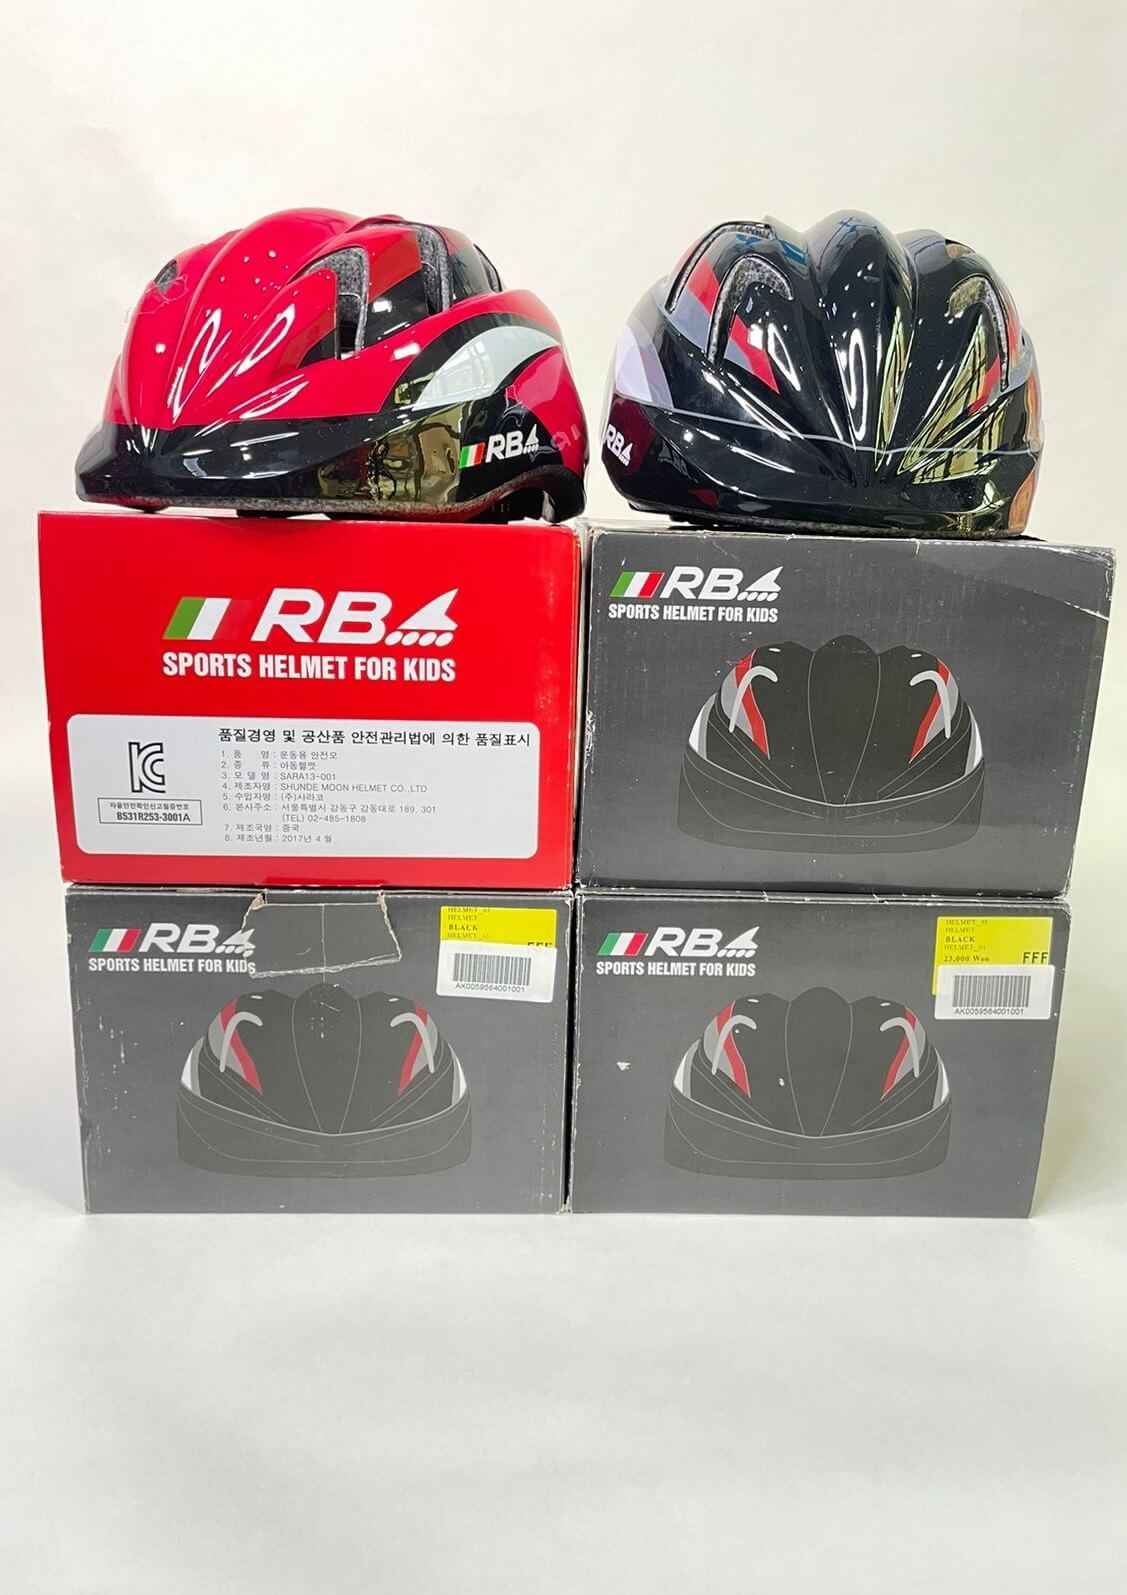 Wholesale lot of 50pcs rollerblade sports helmet overstock clearance deal